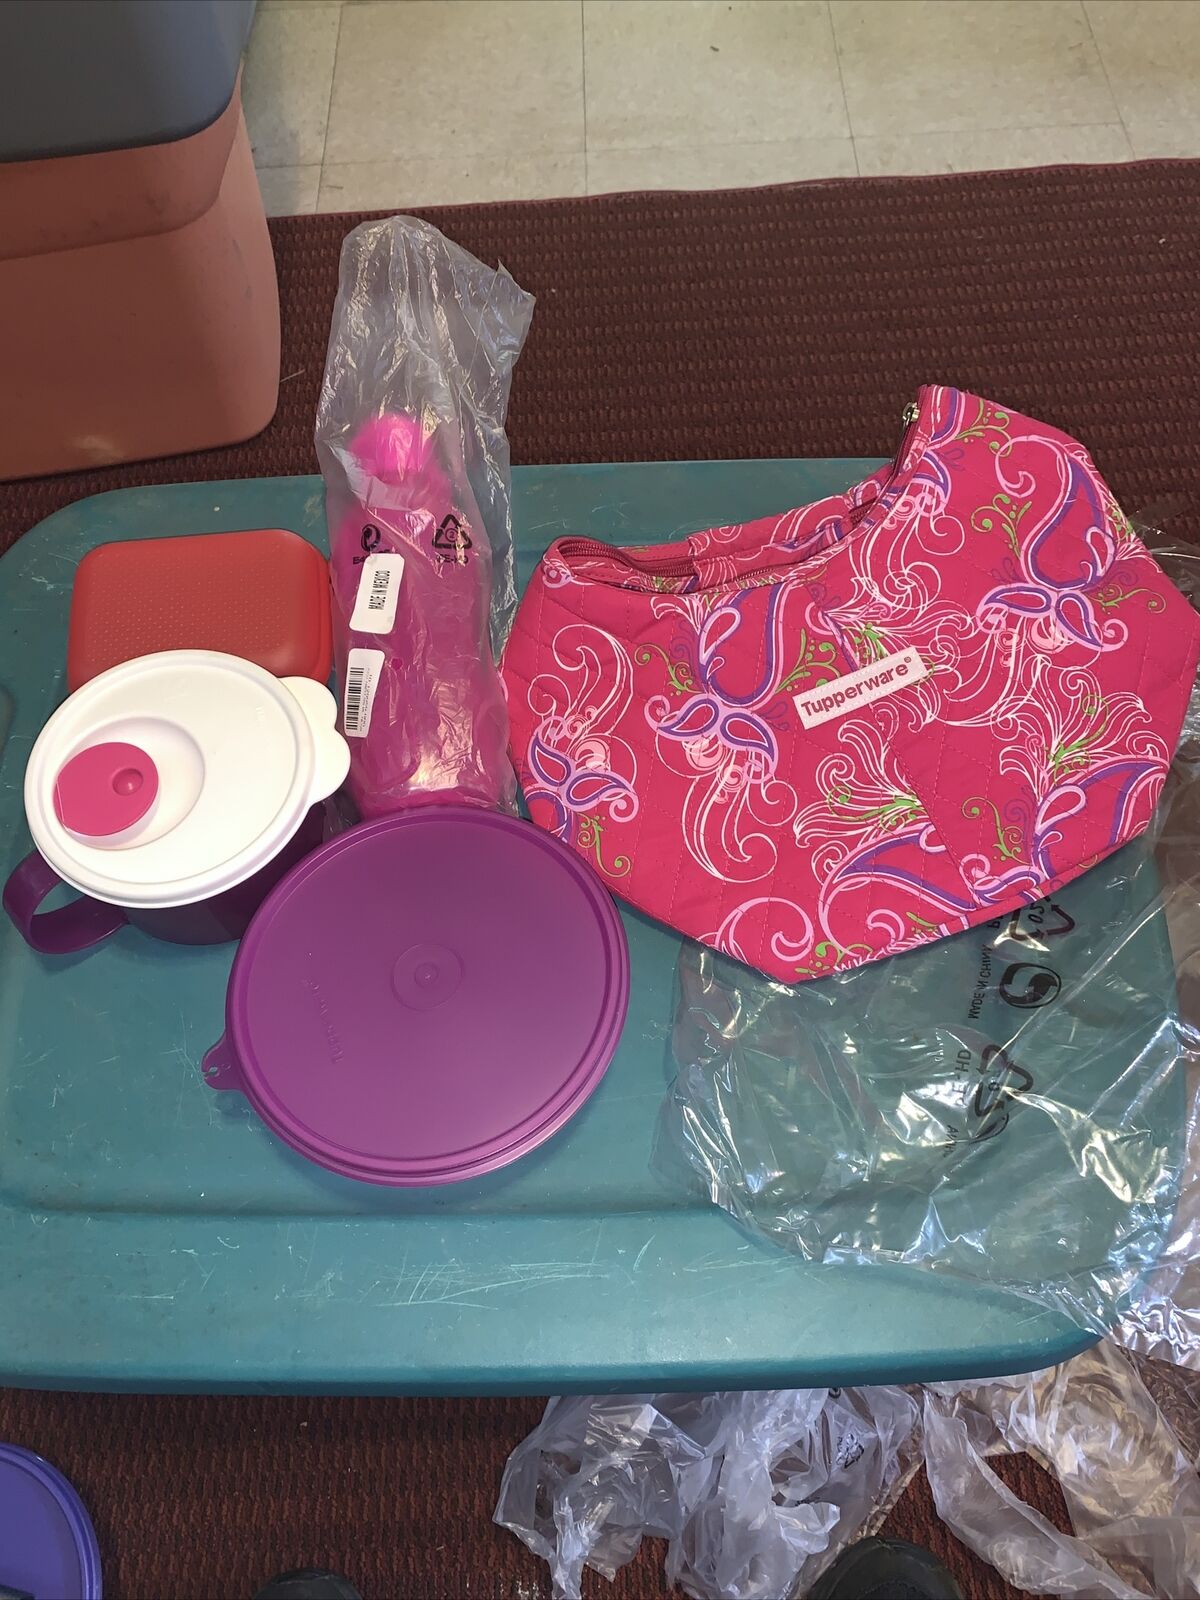 Tupperware Spring Fashion Surprise Lunch Set Hobo Style Pinks New Rare 5 Piece